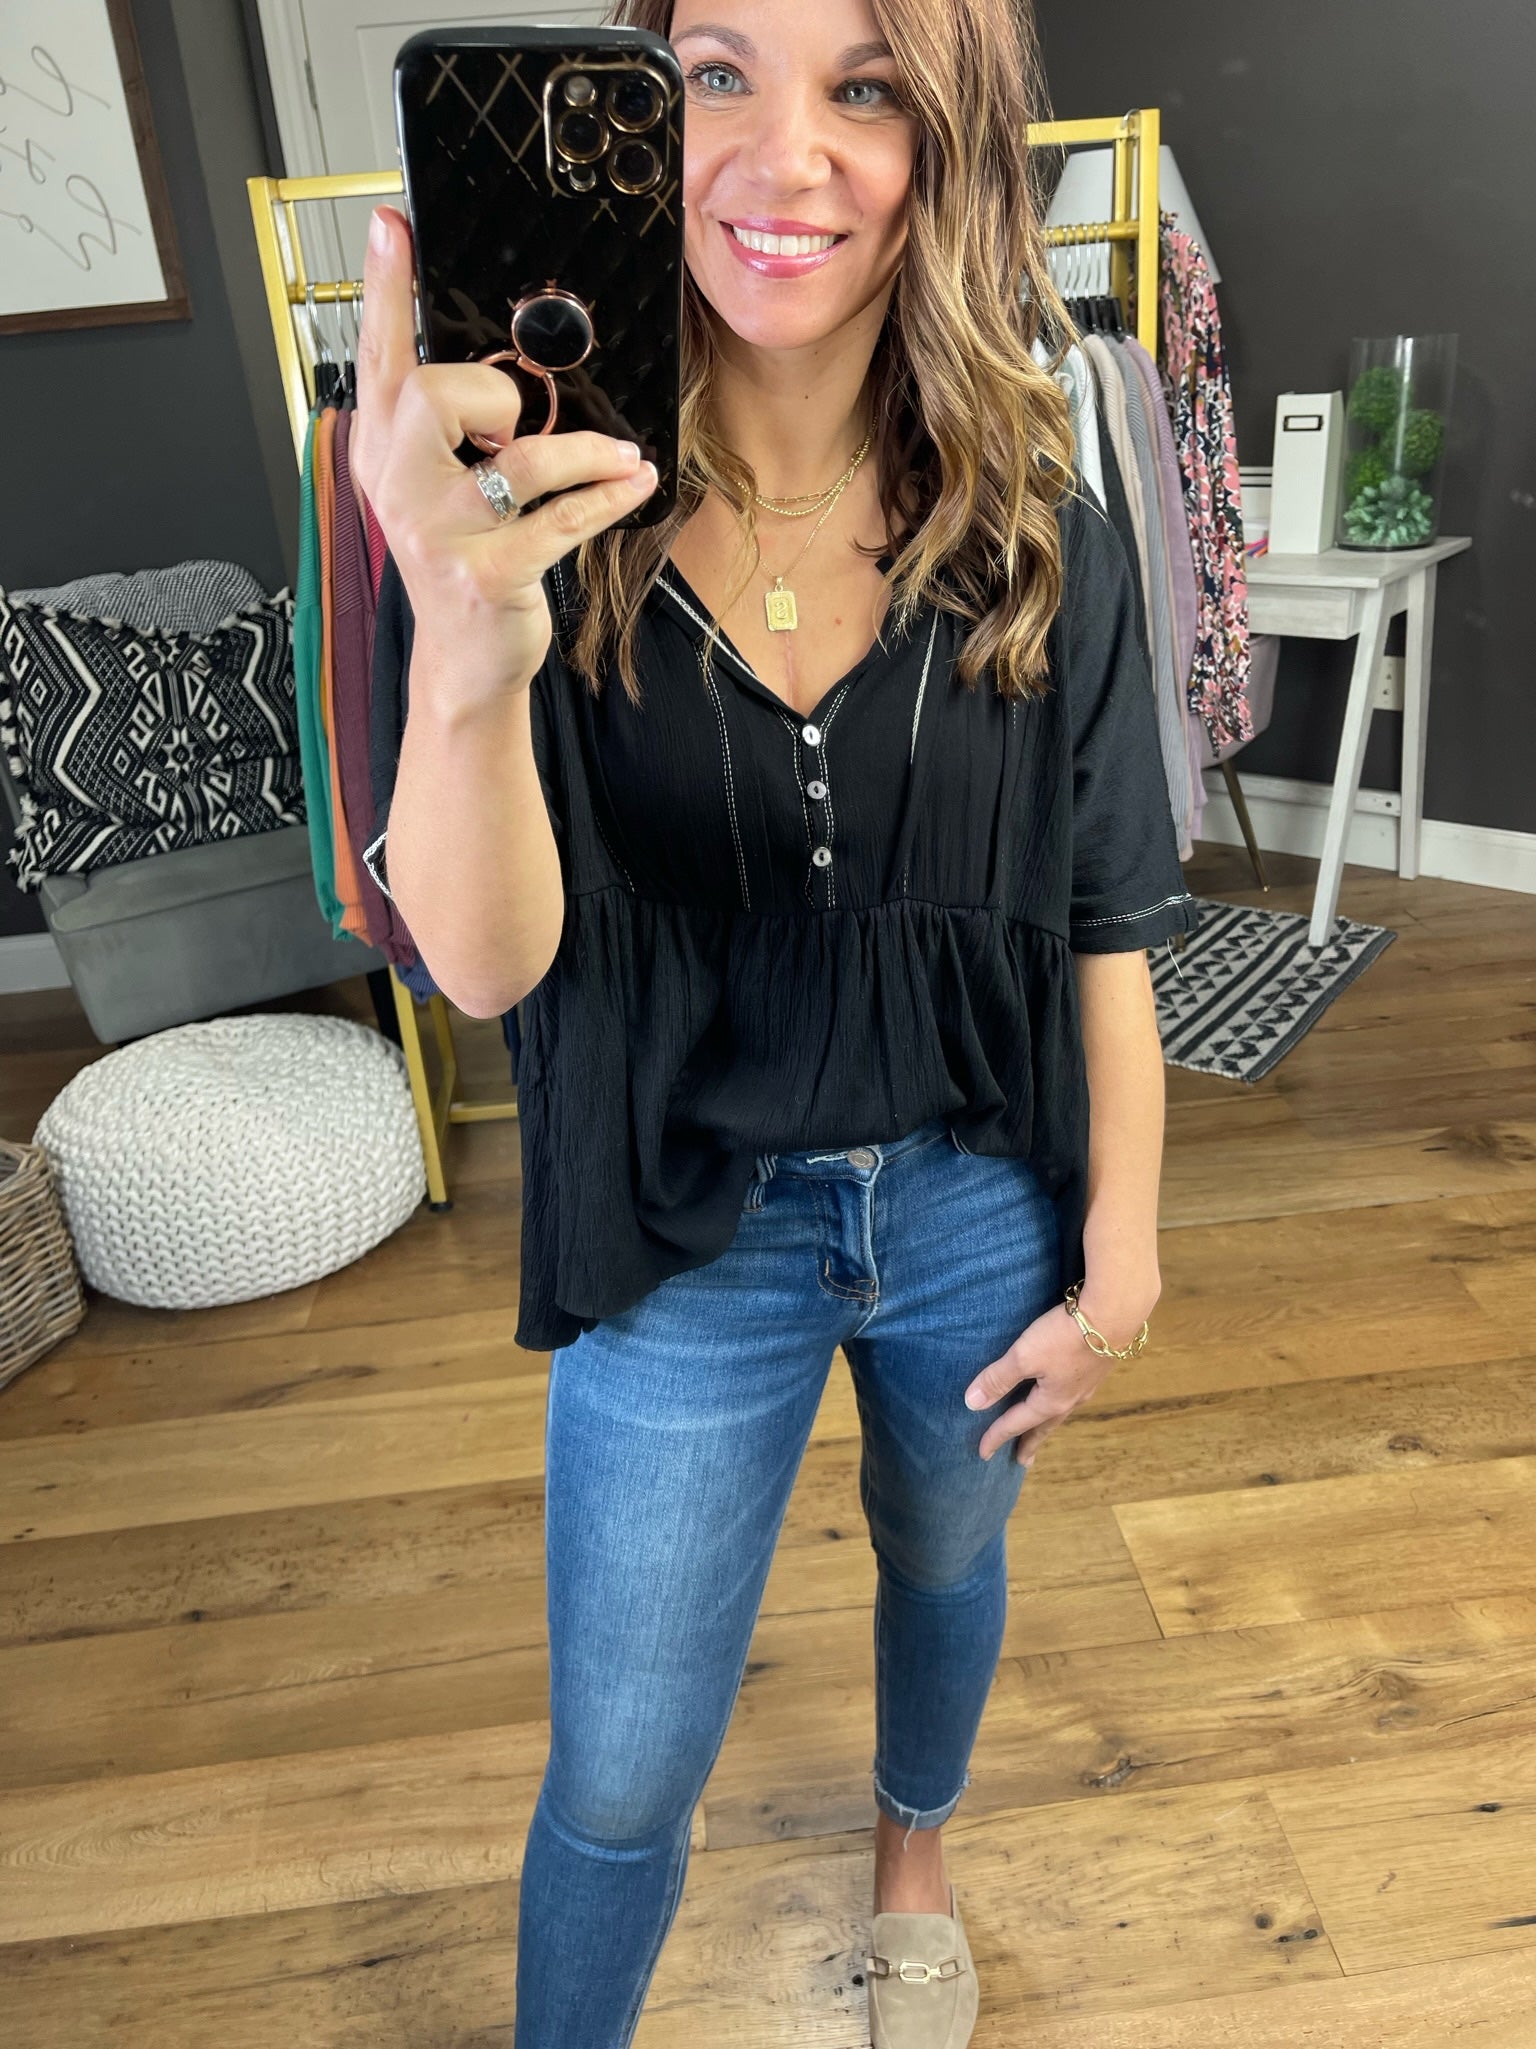 blake colton recommends Down Blouse Selfies